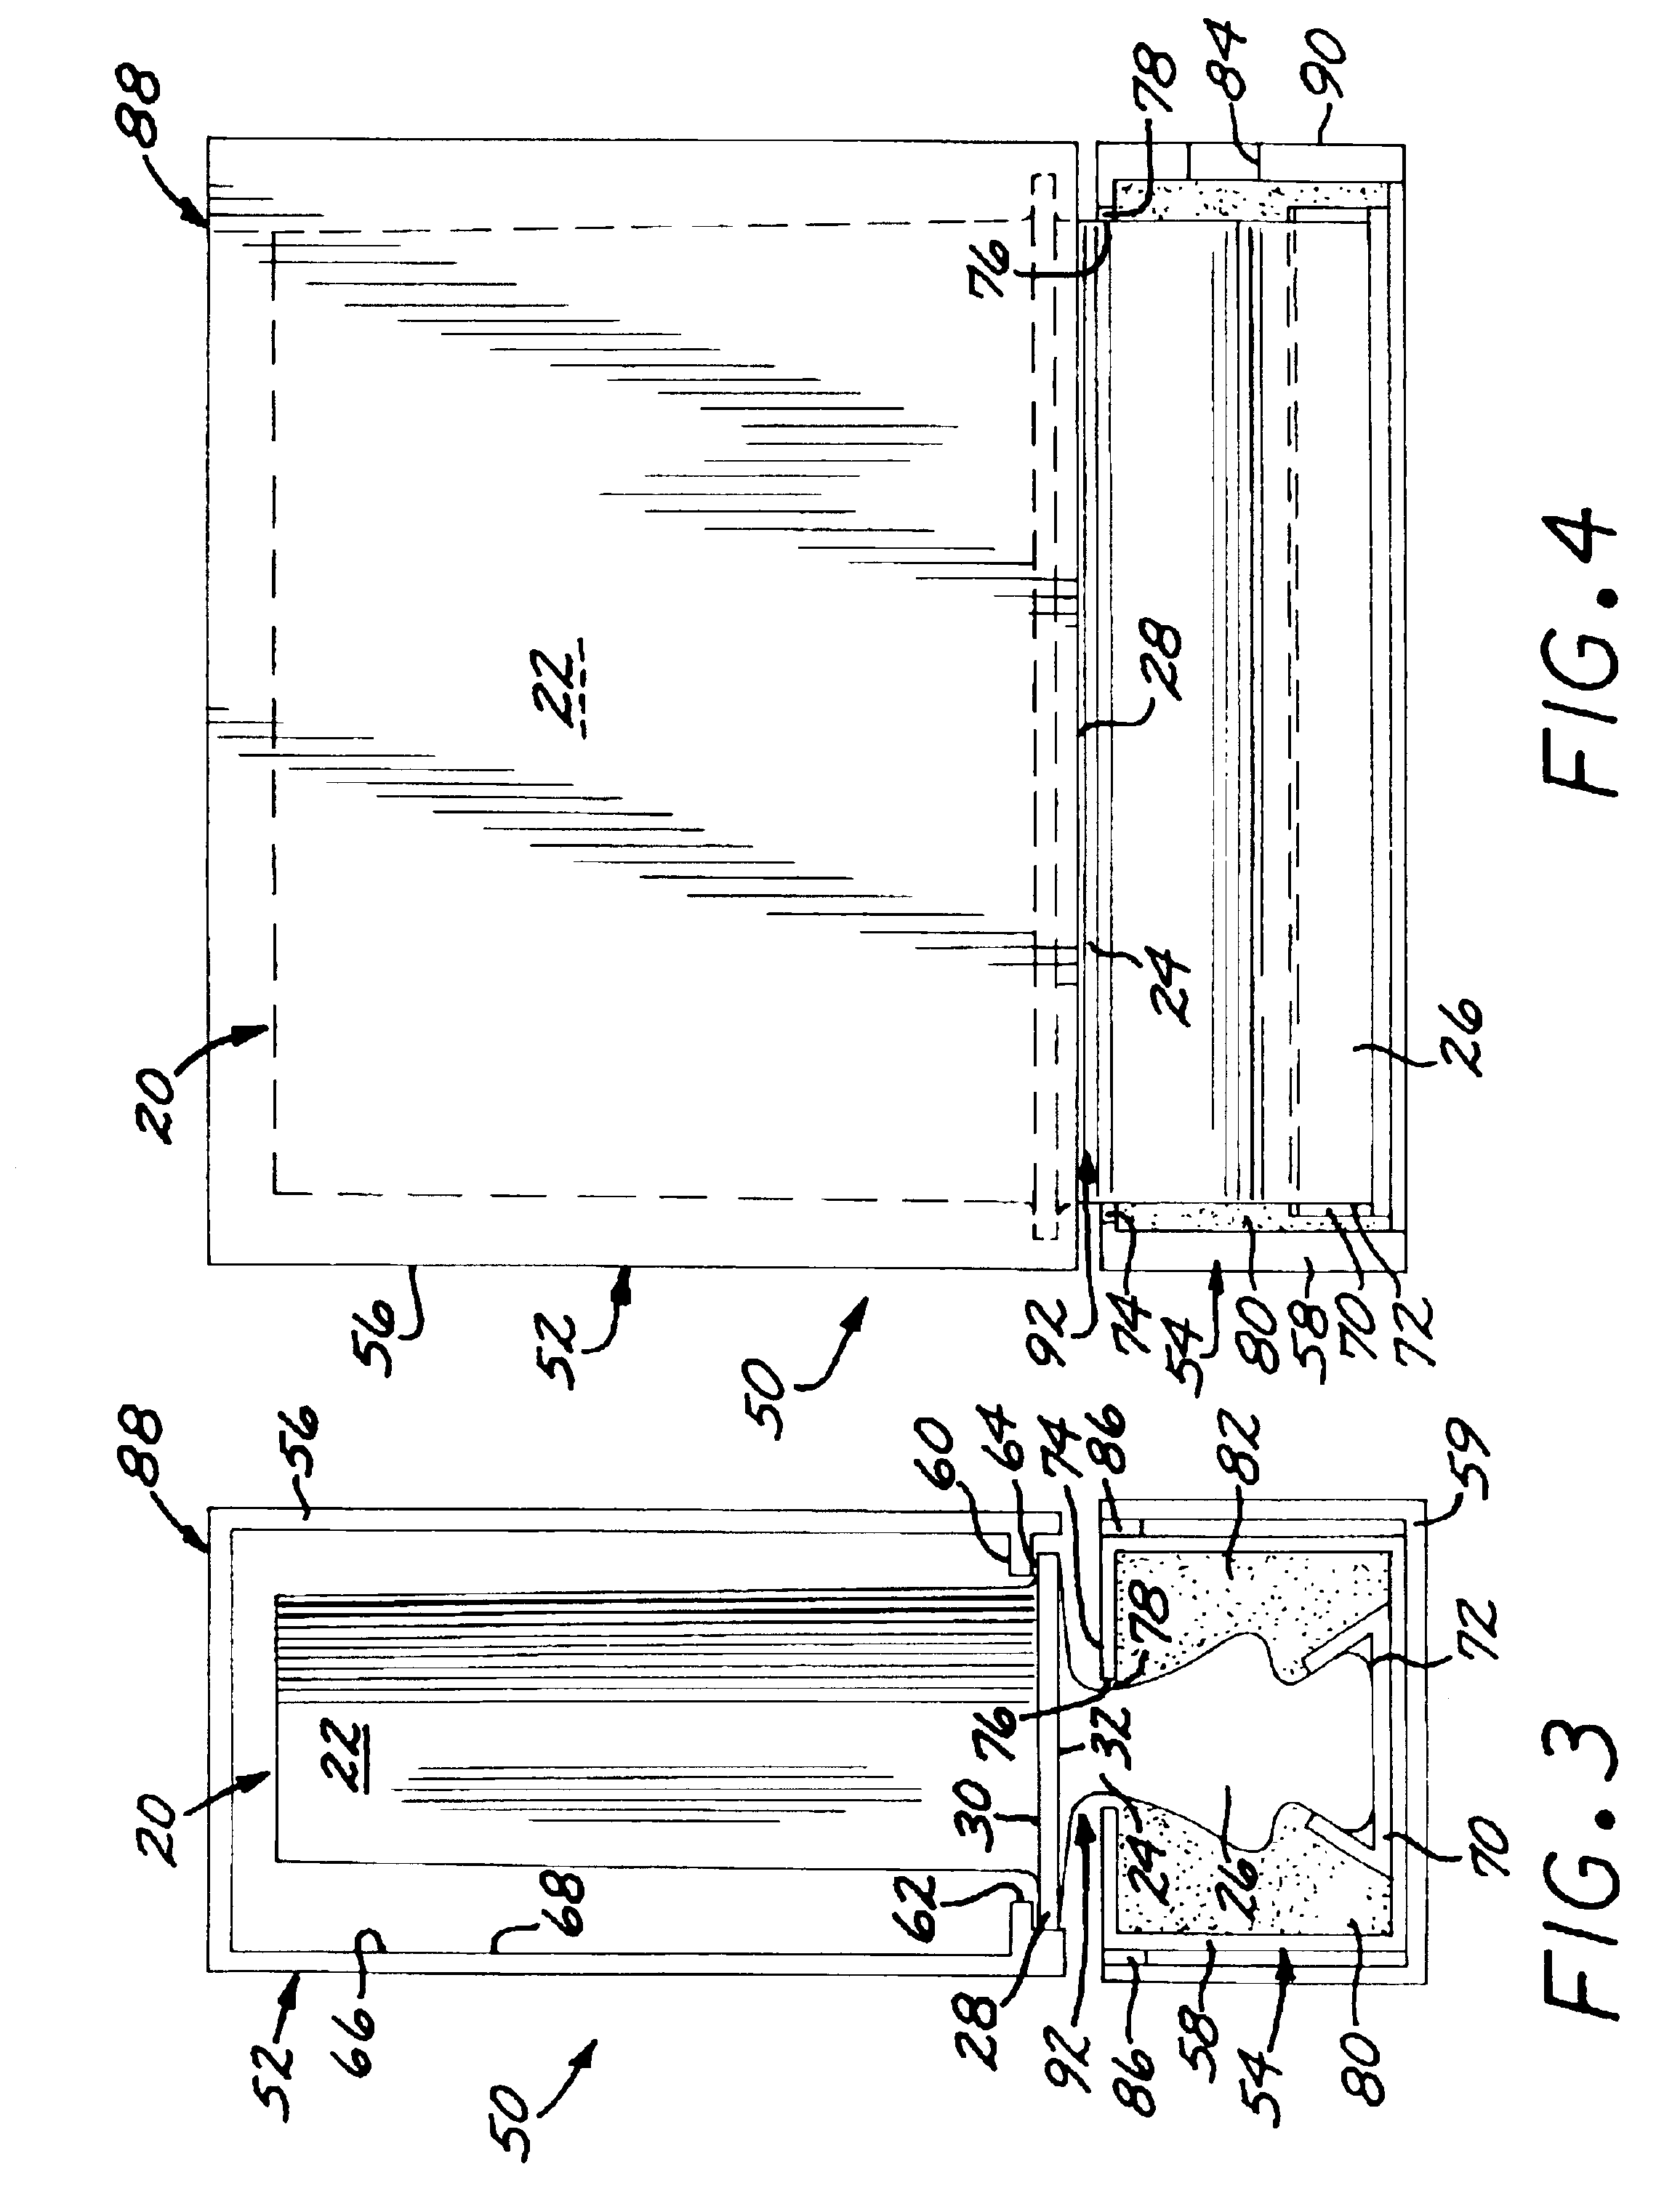 Method for vapor phase aluminiding of a gas turbine blade partially masked with a masking enclosure